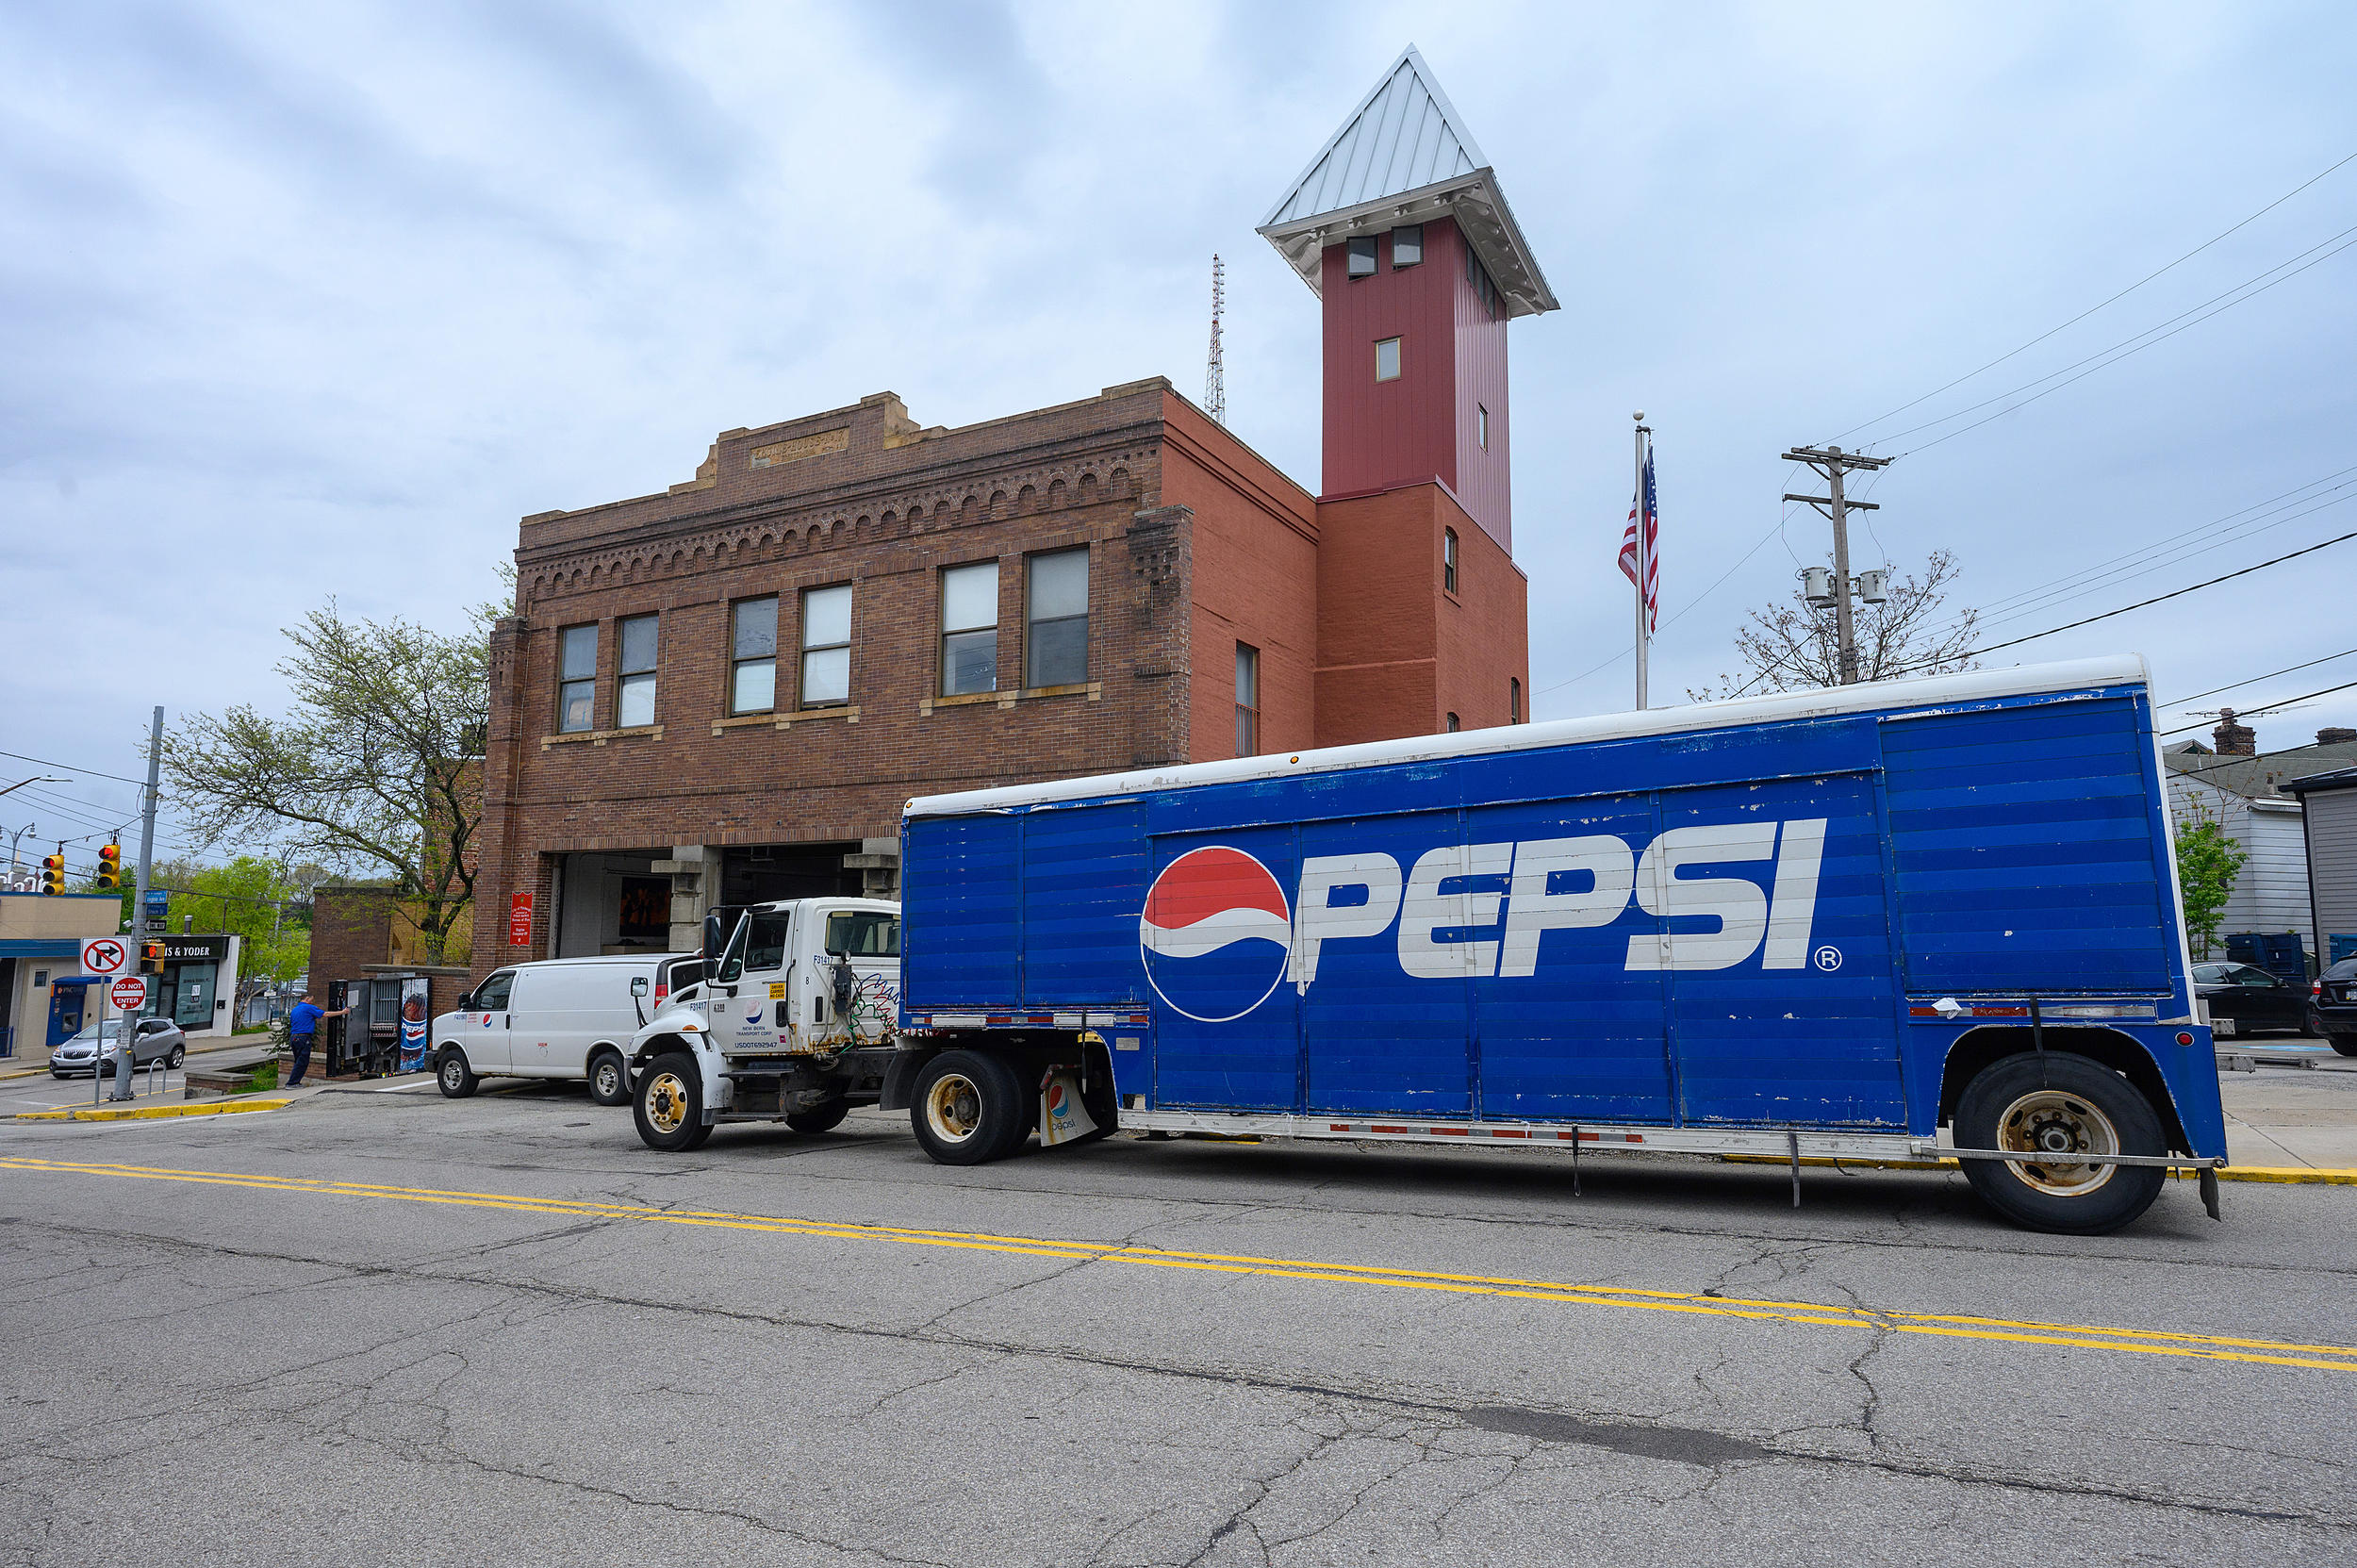 Pepsi rebrands with new logo for first time in 14 years